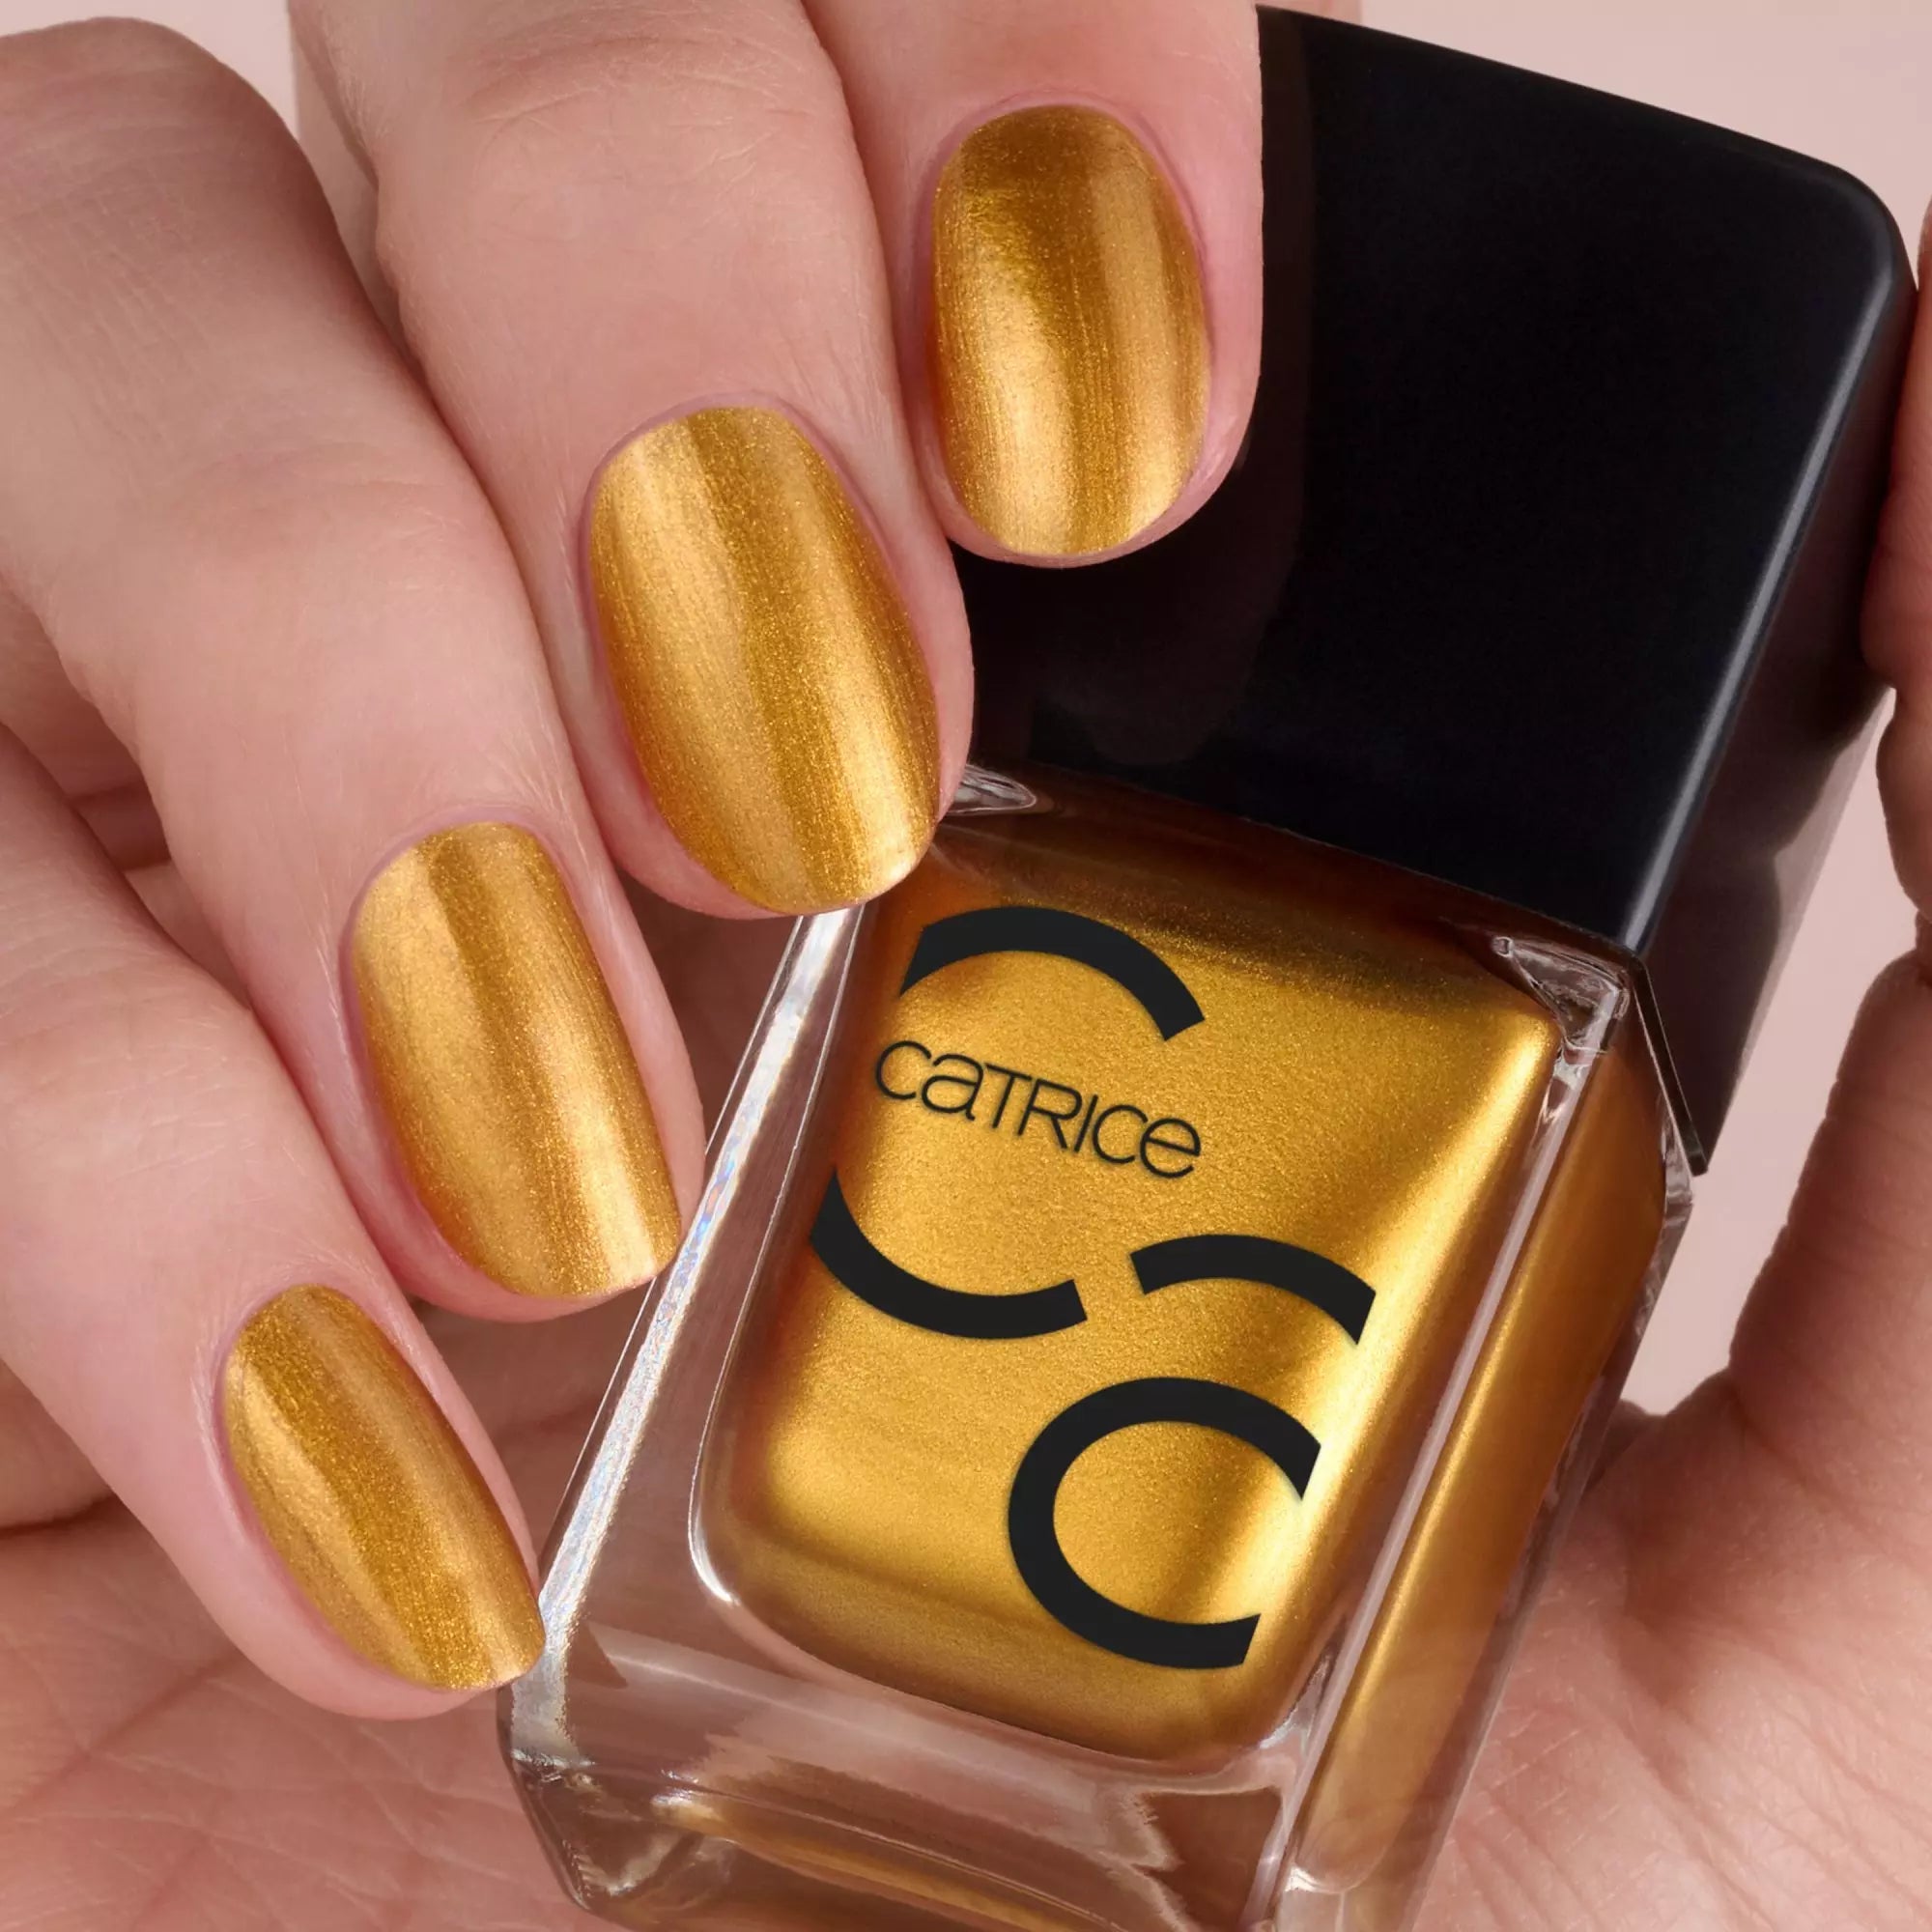 Polish Nail Ultimate - Lacquer Gold Finish Gloss 156 Gel ICONAILS Catrice